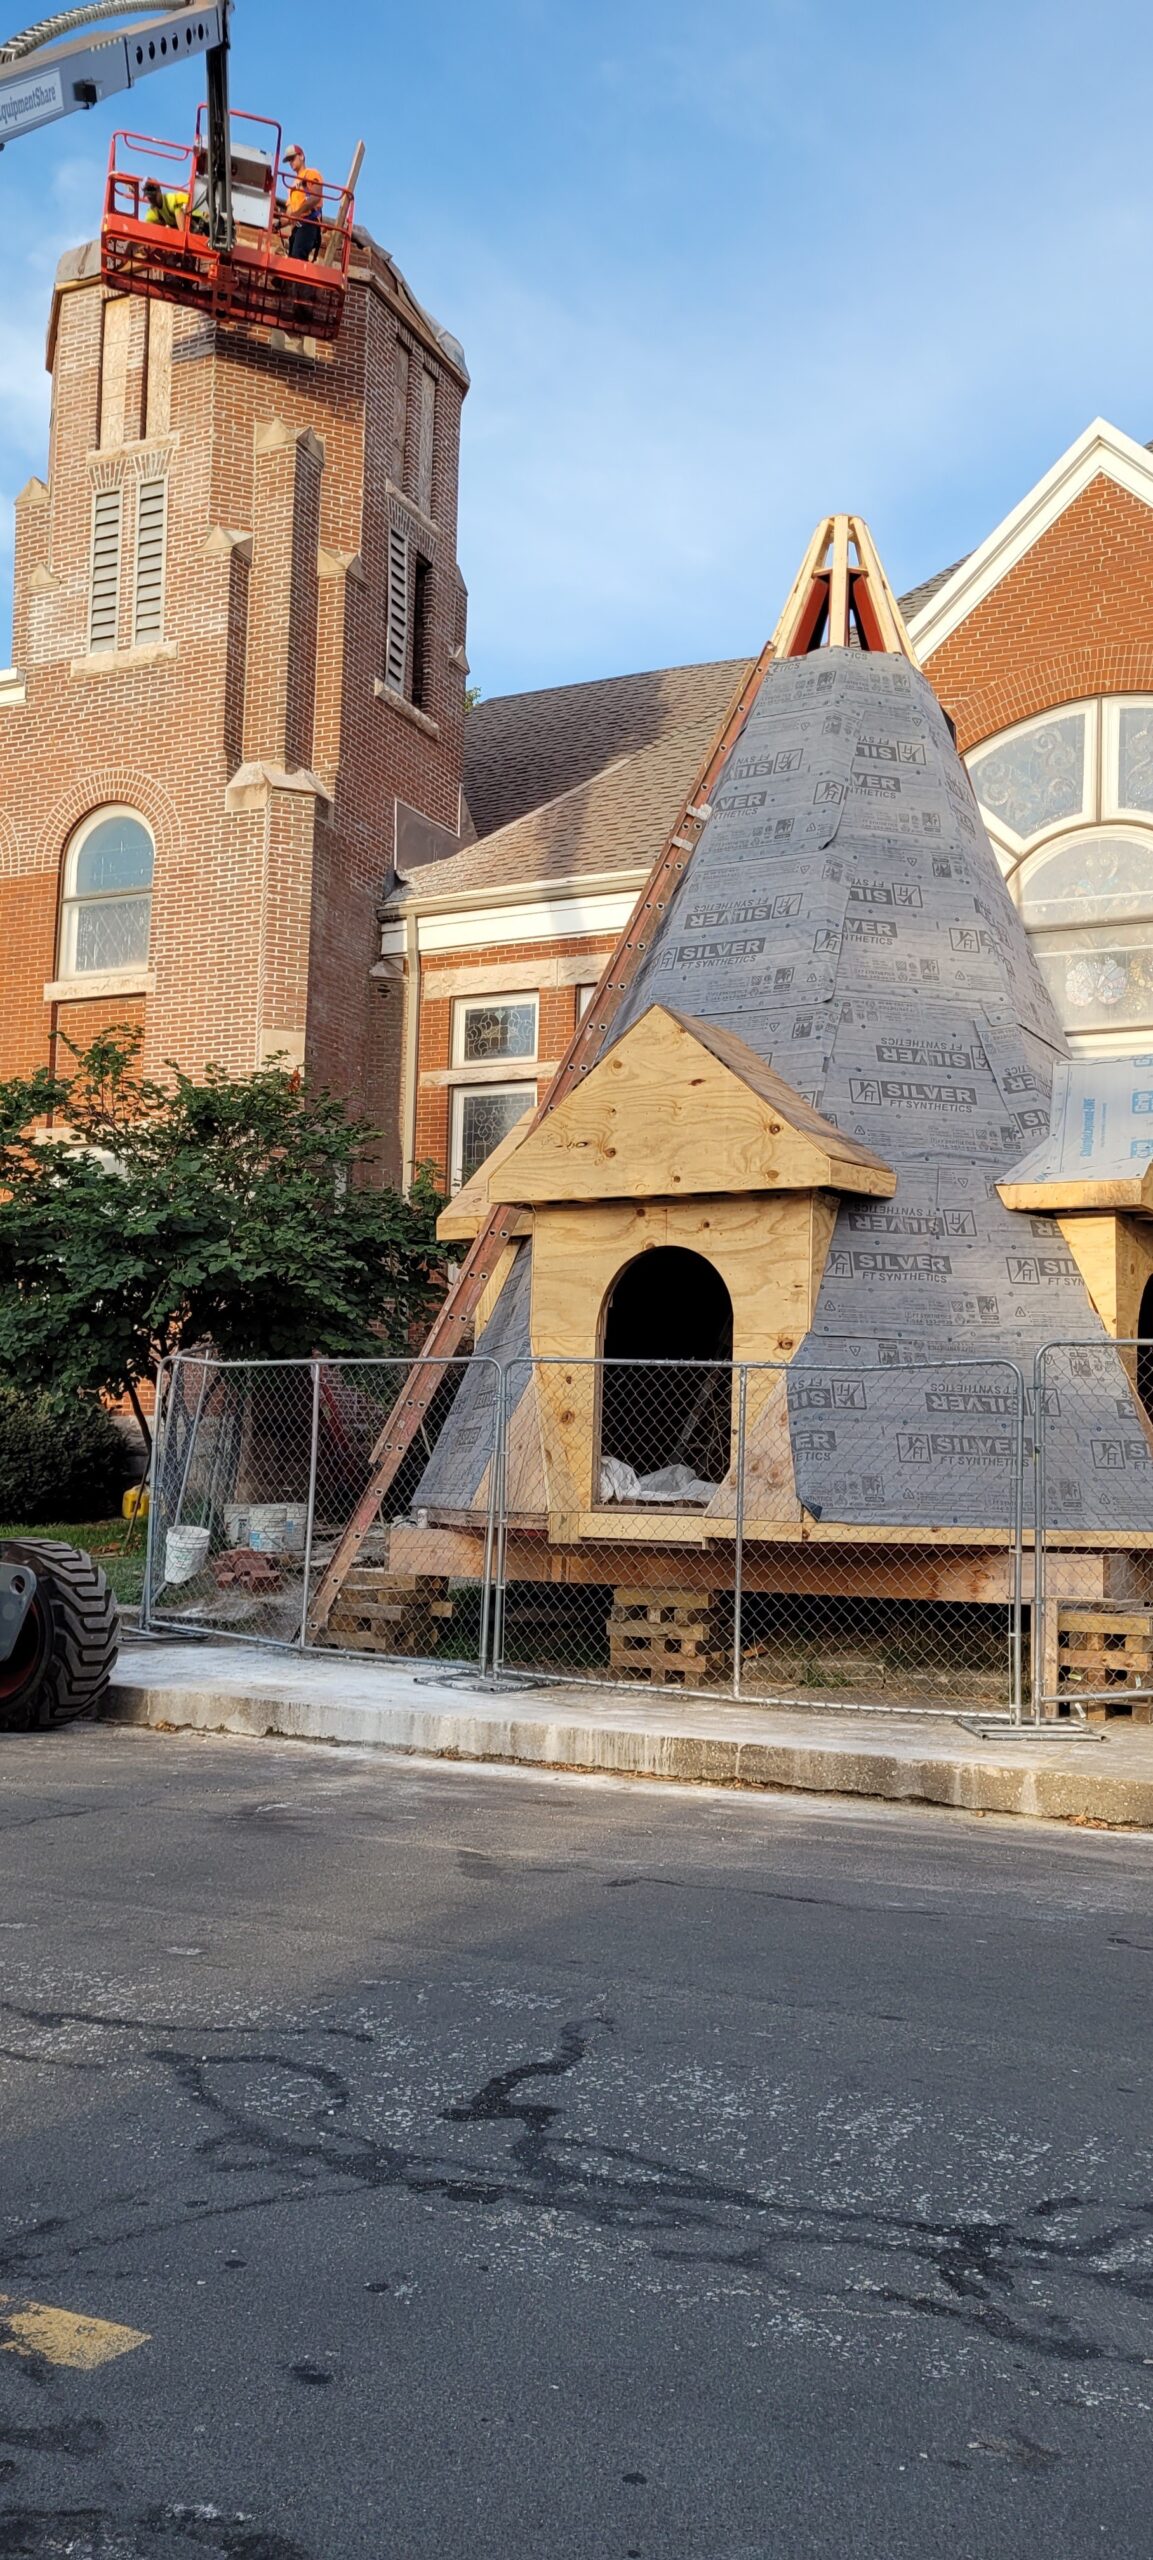 Tuck pointing the brick on the bell tower.  Building the dormers on the steeple.  Shingles will be placed on the steeple before being lifted into place.
Stay tuned, and we will have a watch party for the raising of the steeple and placing the bell back.